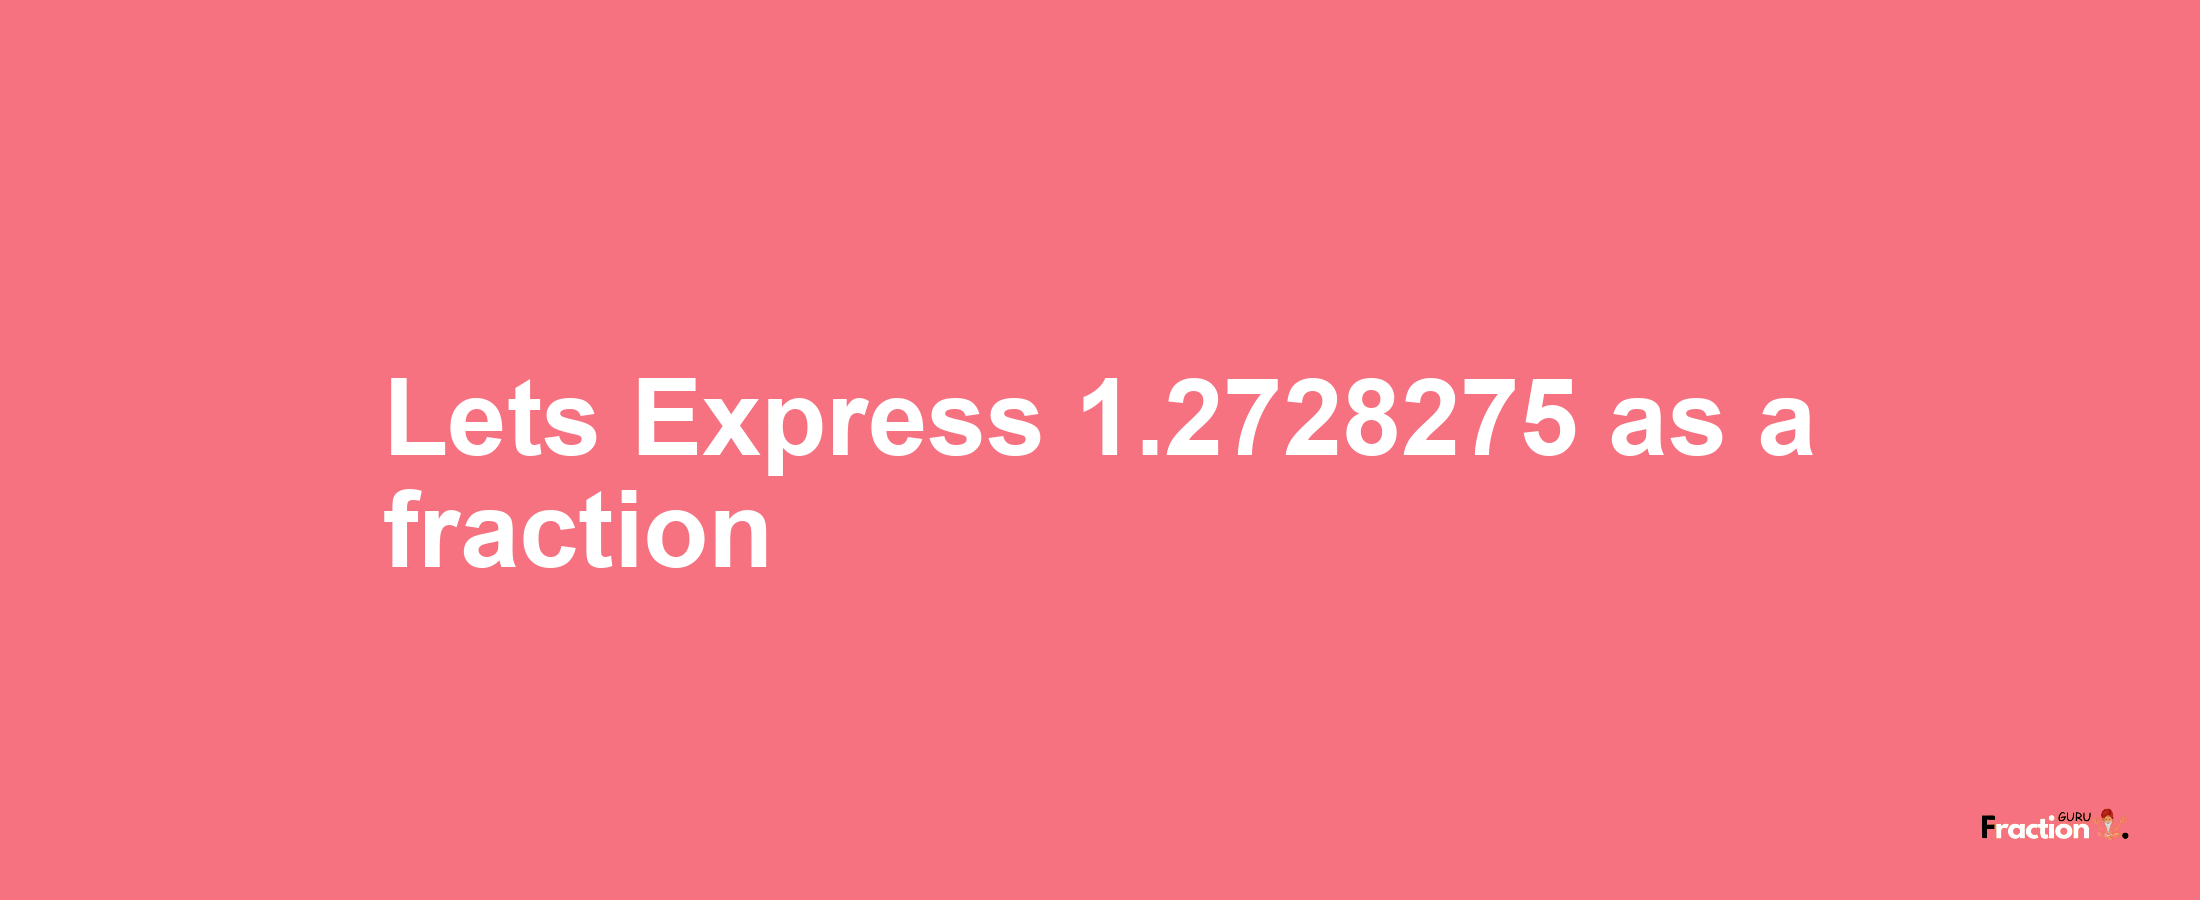 Lets Express 1.2728275 as afraction